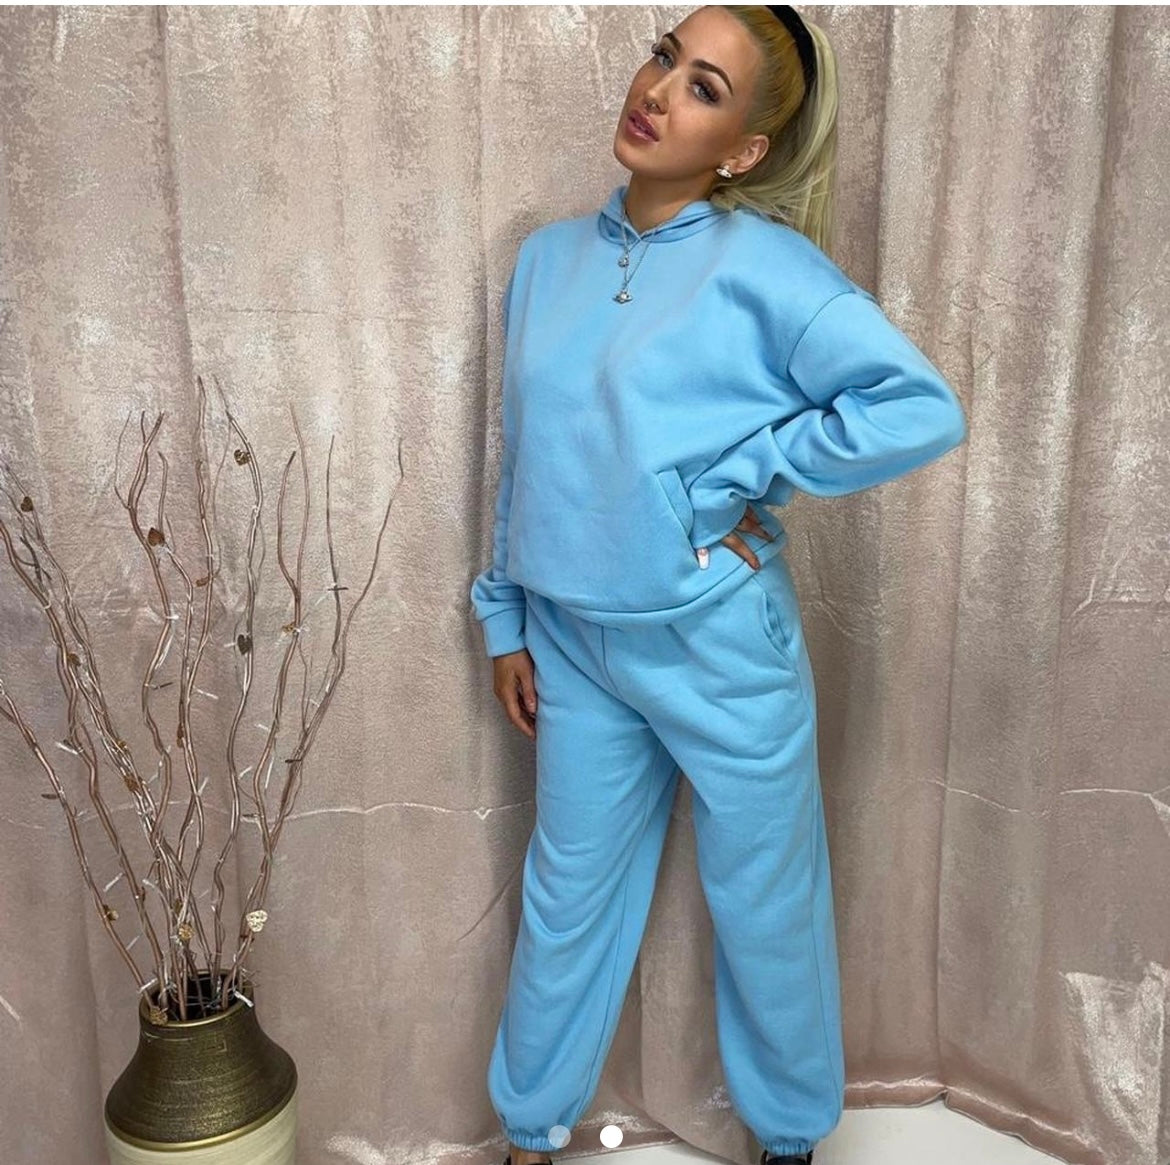 OVER SIZED BLUE TRACKSUIT, LOUNGE WEAR, COMFY TRACKSUIT